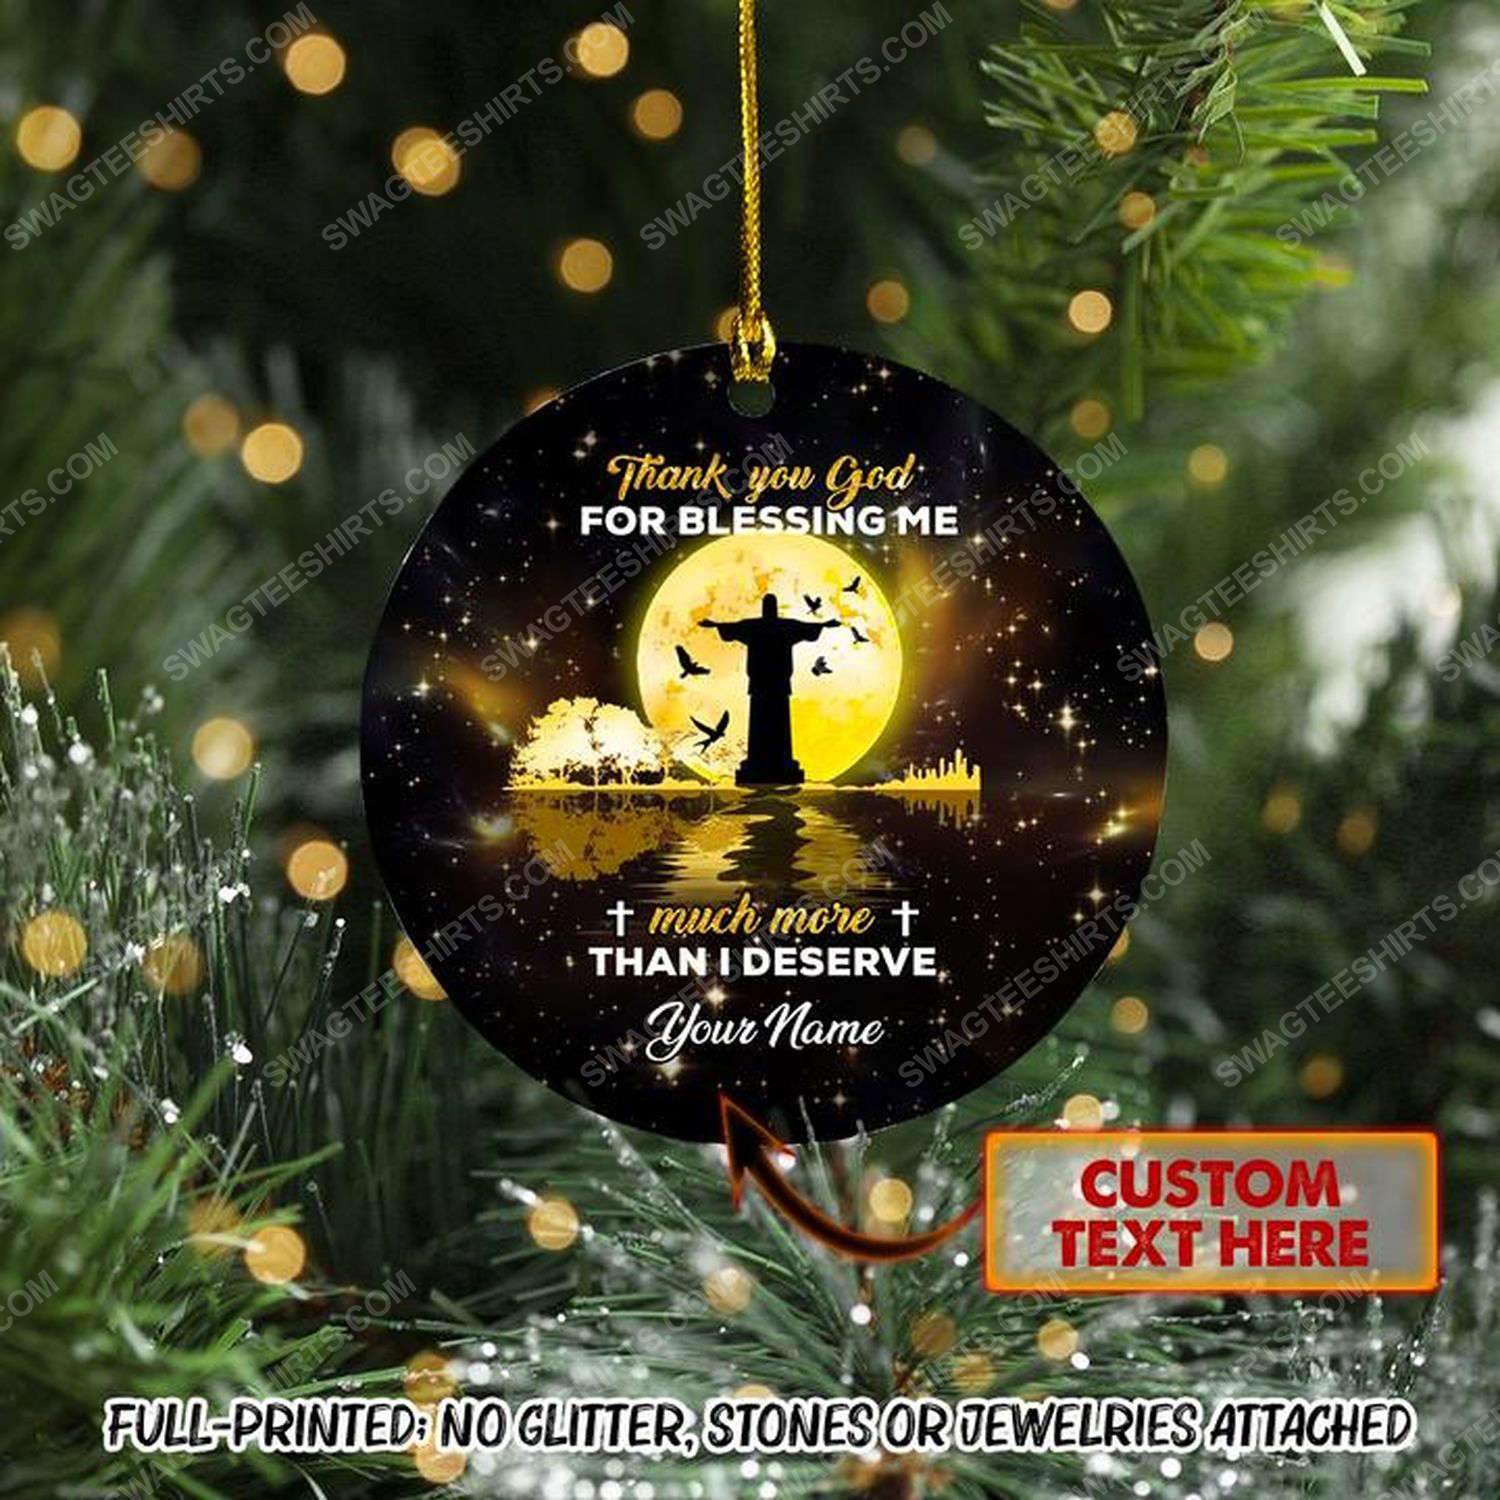 Custom thank you for blessing me christmas time ornament